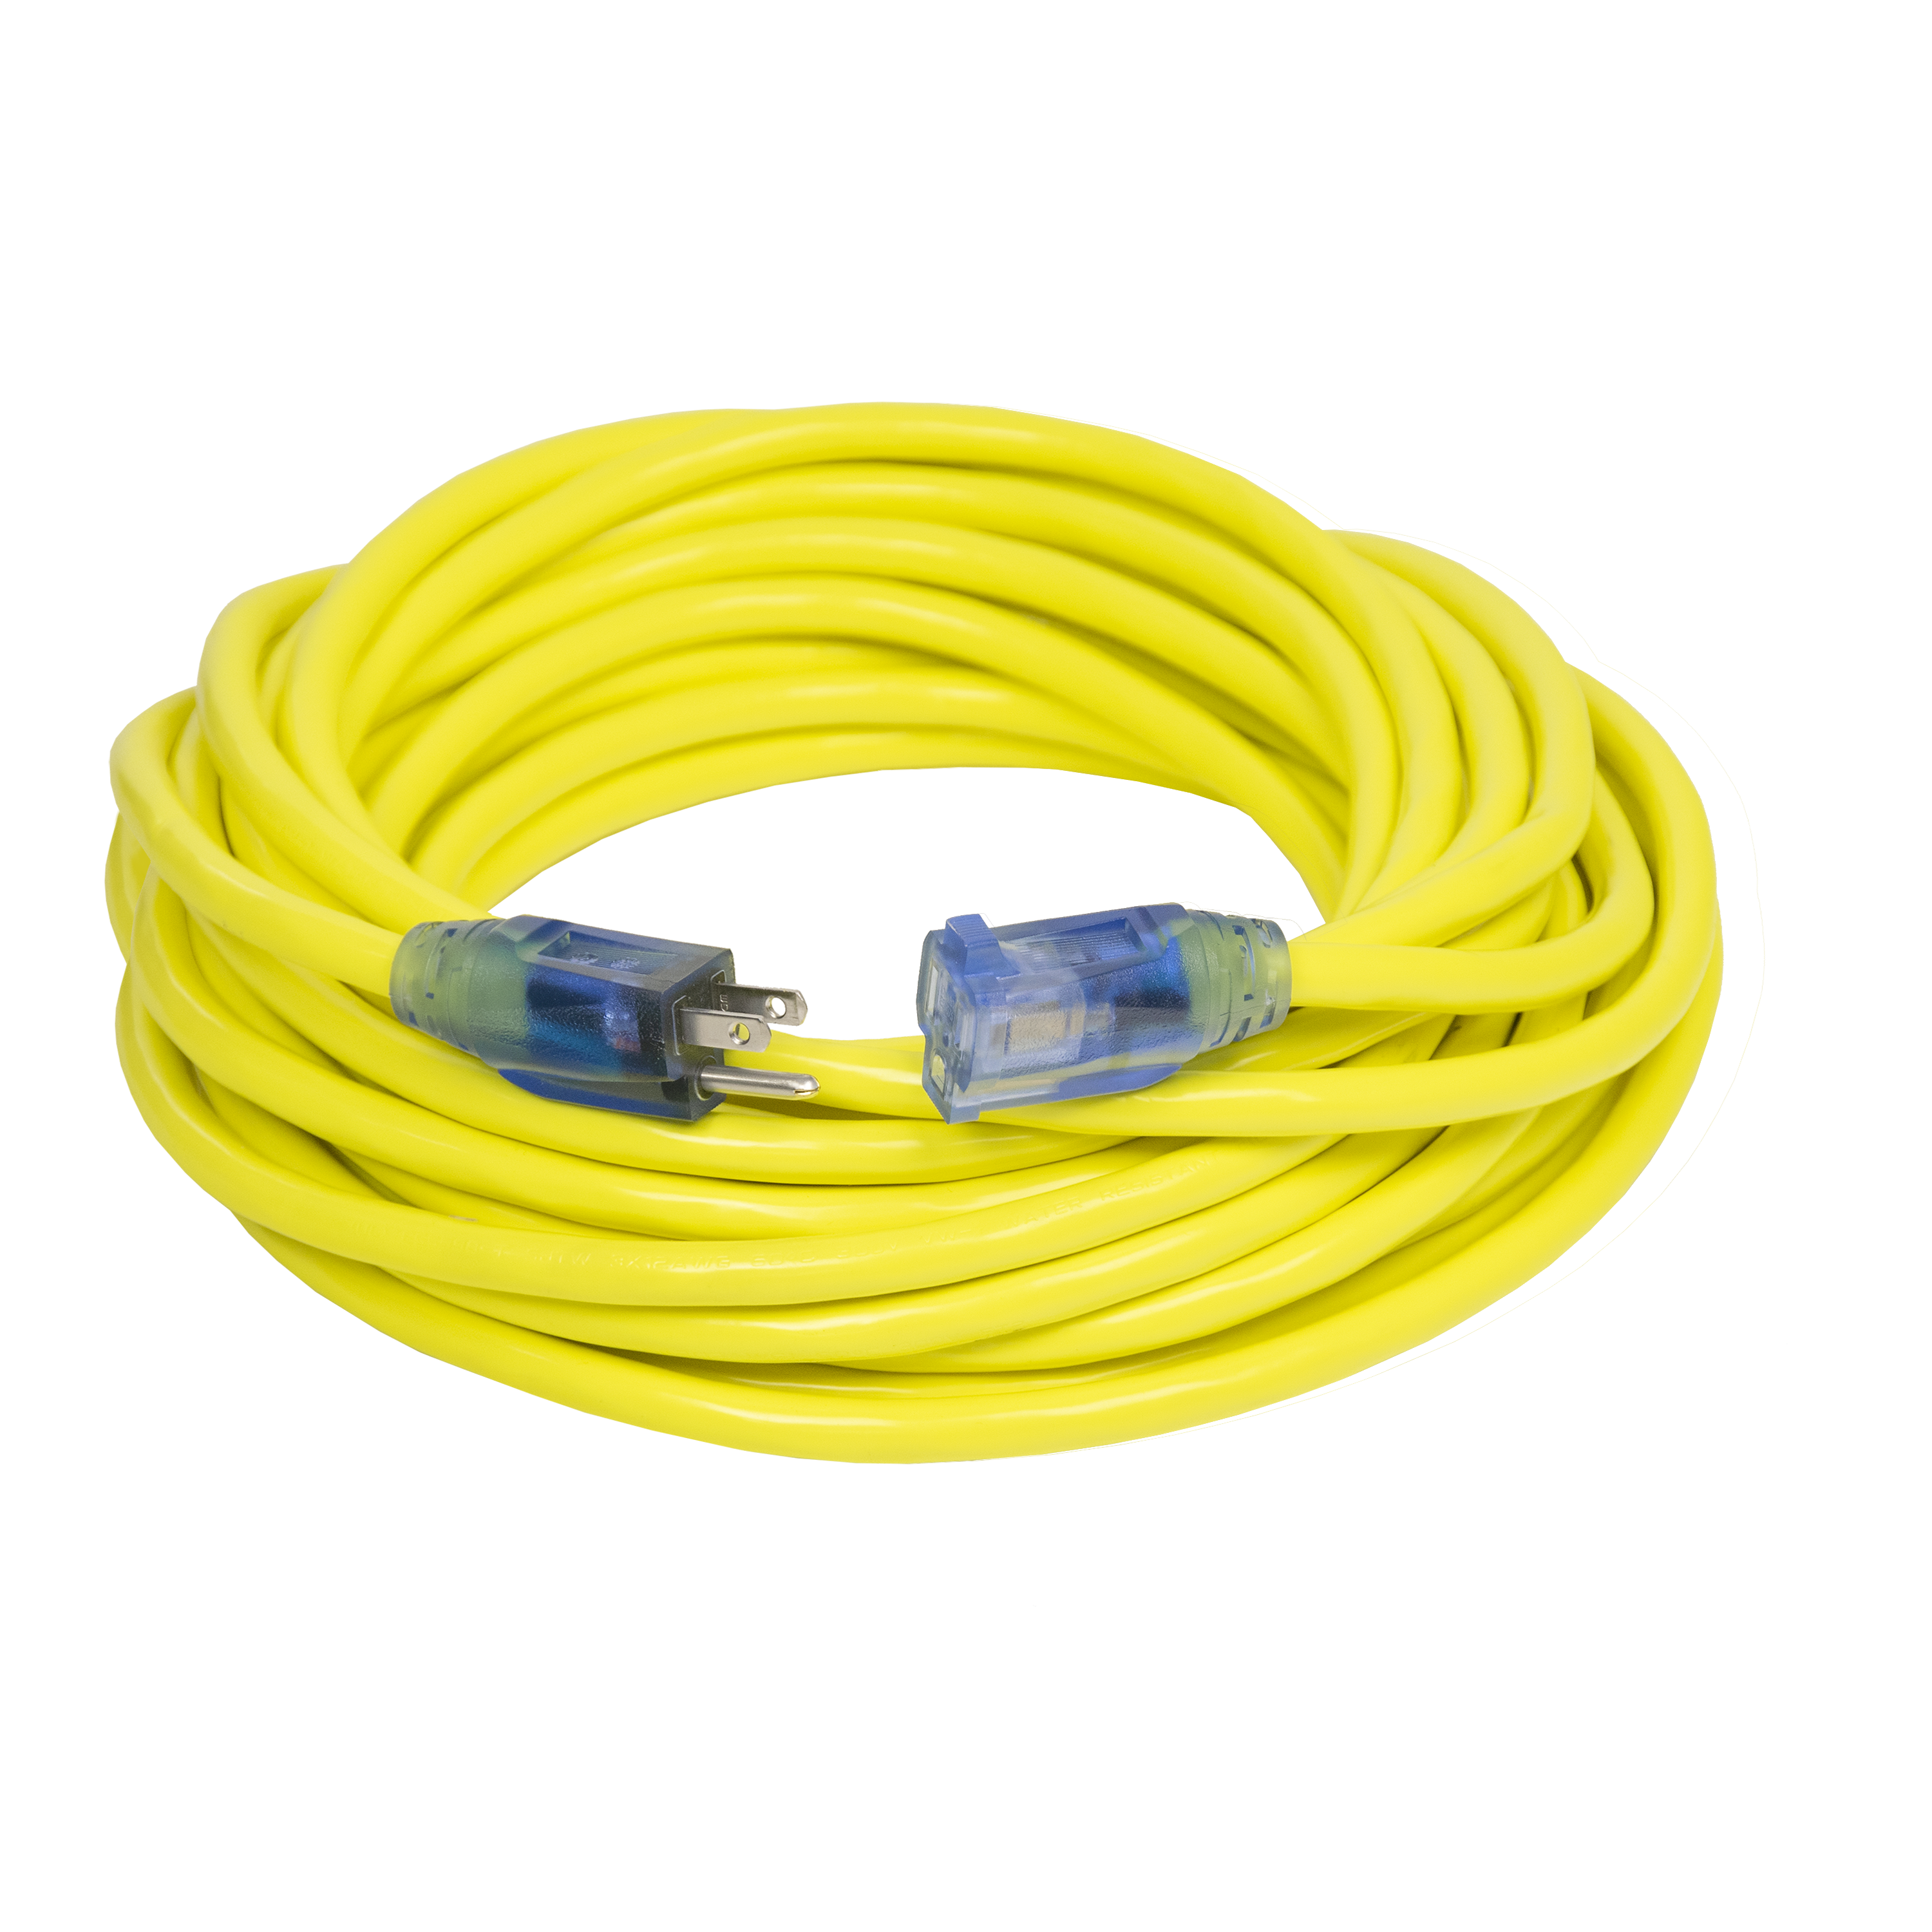 DEWALT 50 ft. 12/3 SJTW Heavy-Duty Locking Yellow Extension Cord with Dual  Lighted Plugs for Power and Ground Continuity DXEC14412050 - The Home Depot